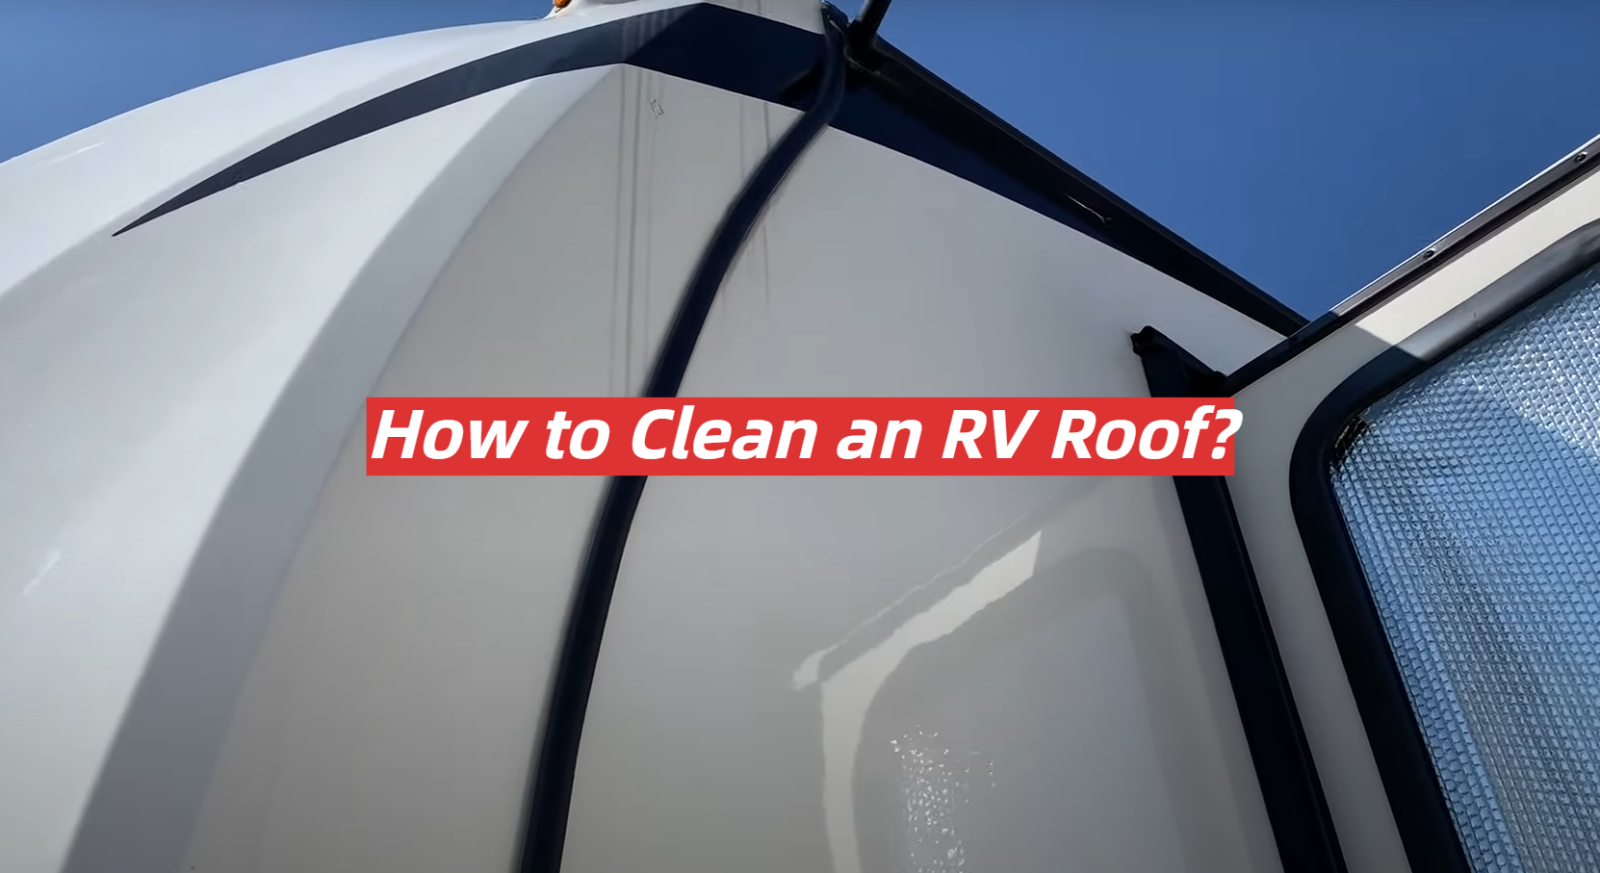 How to Clean an RV Roof?